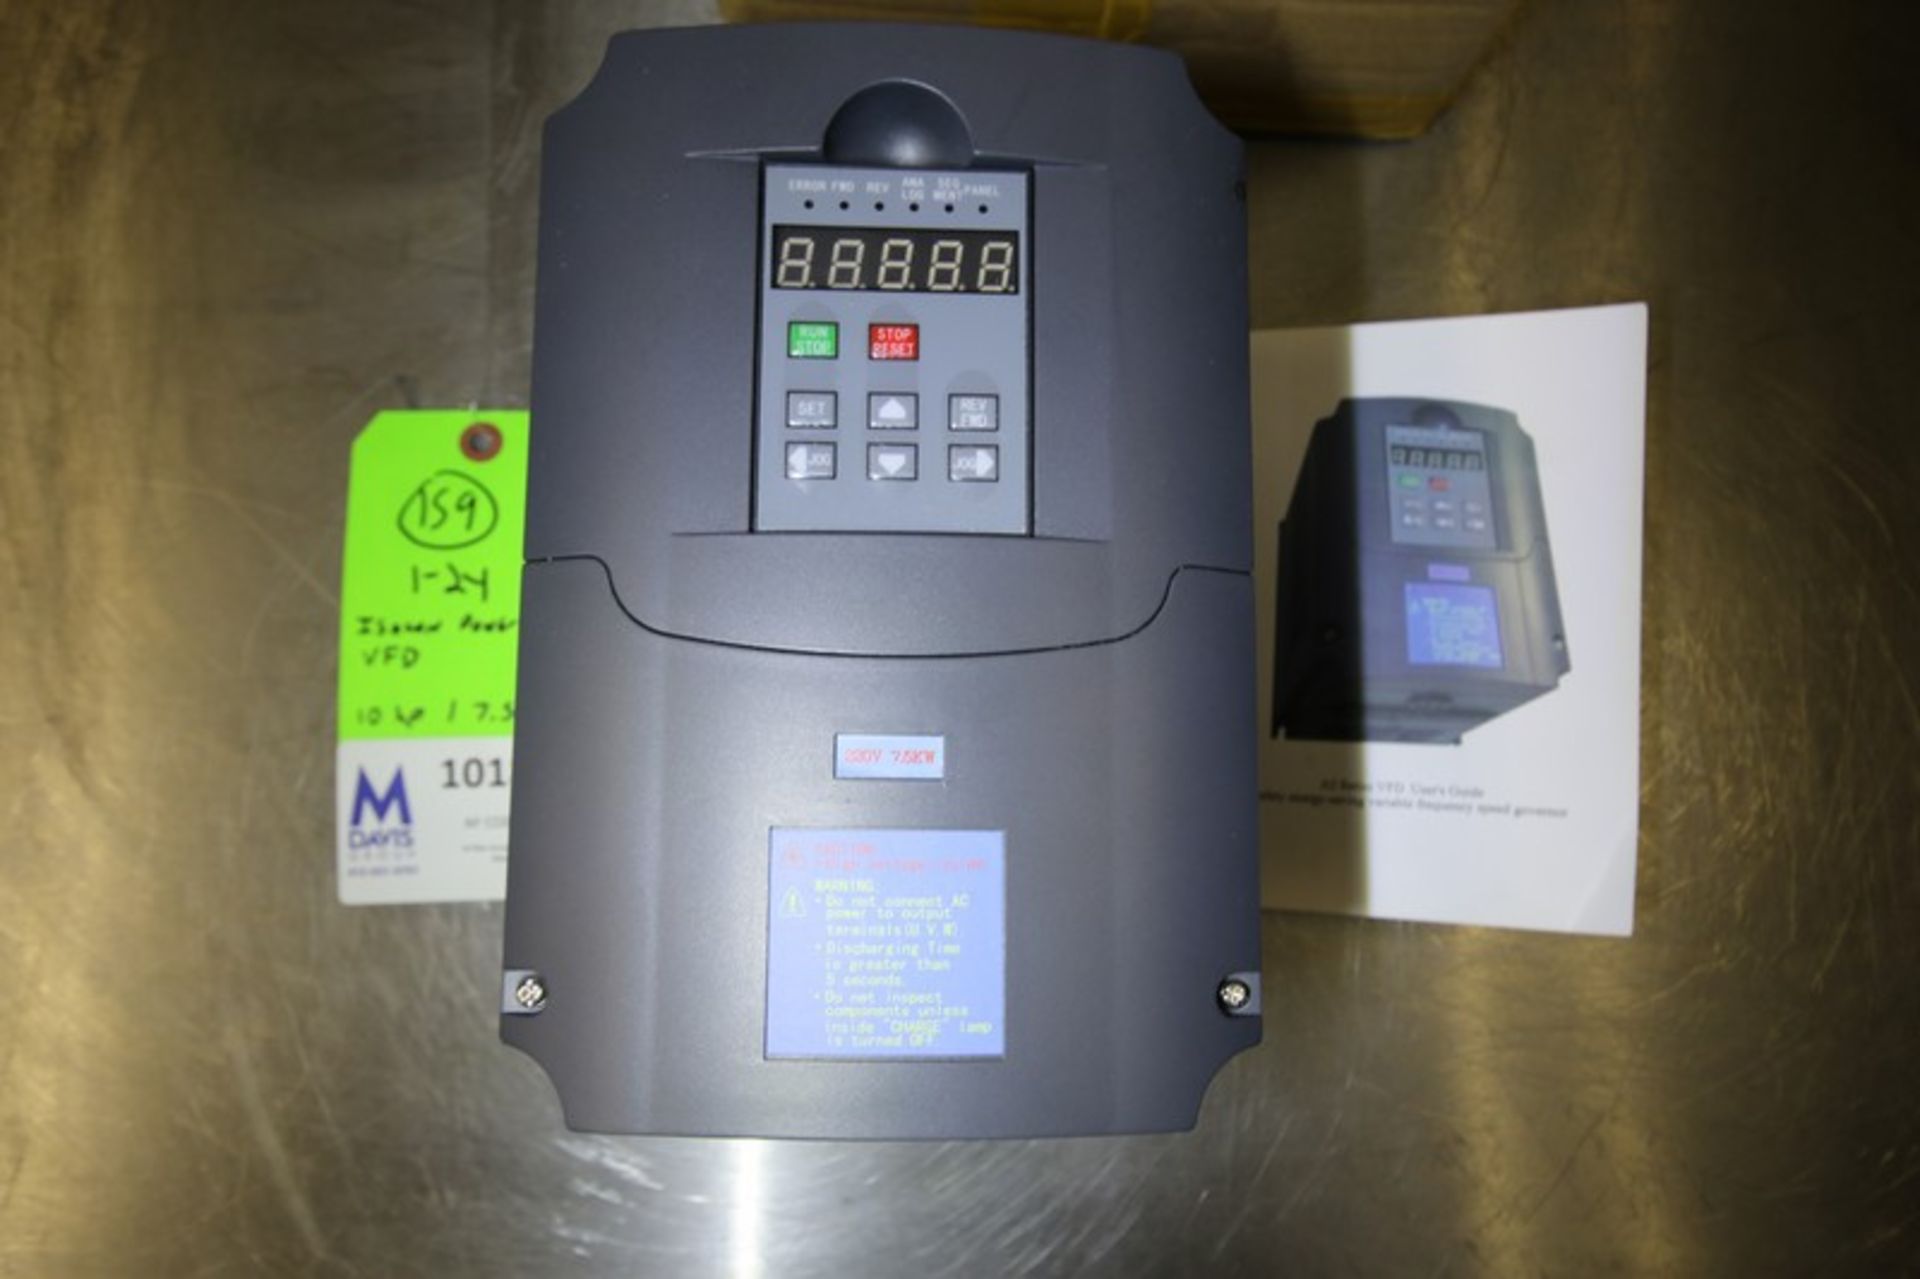 New Isacon Power Control VFD, Model A2-8075, 220V 3 Phase (INV#101814) (Located @ the MDG Auction - Image 2 of 3